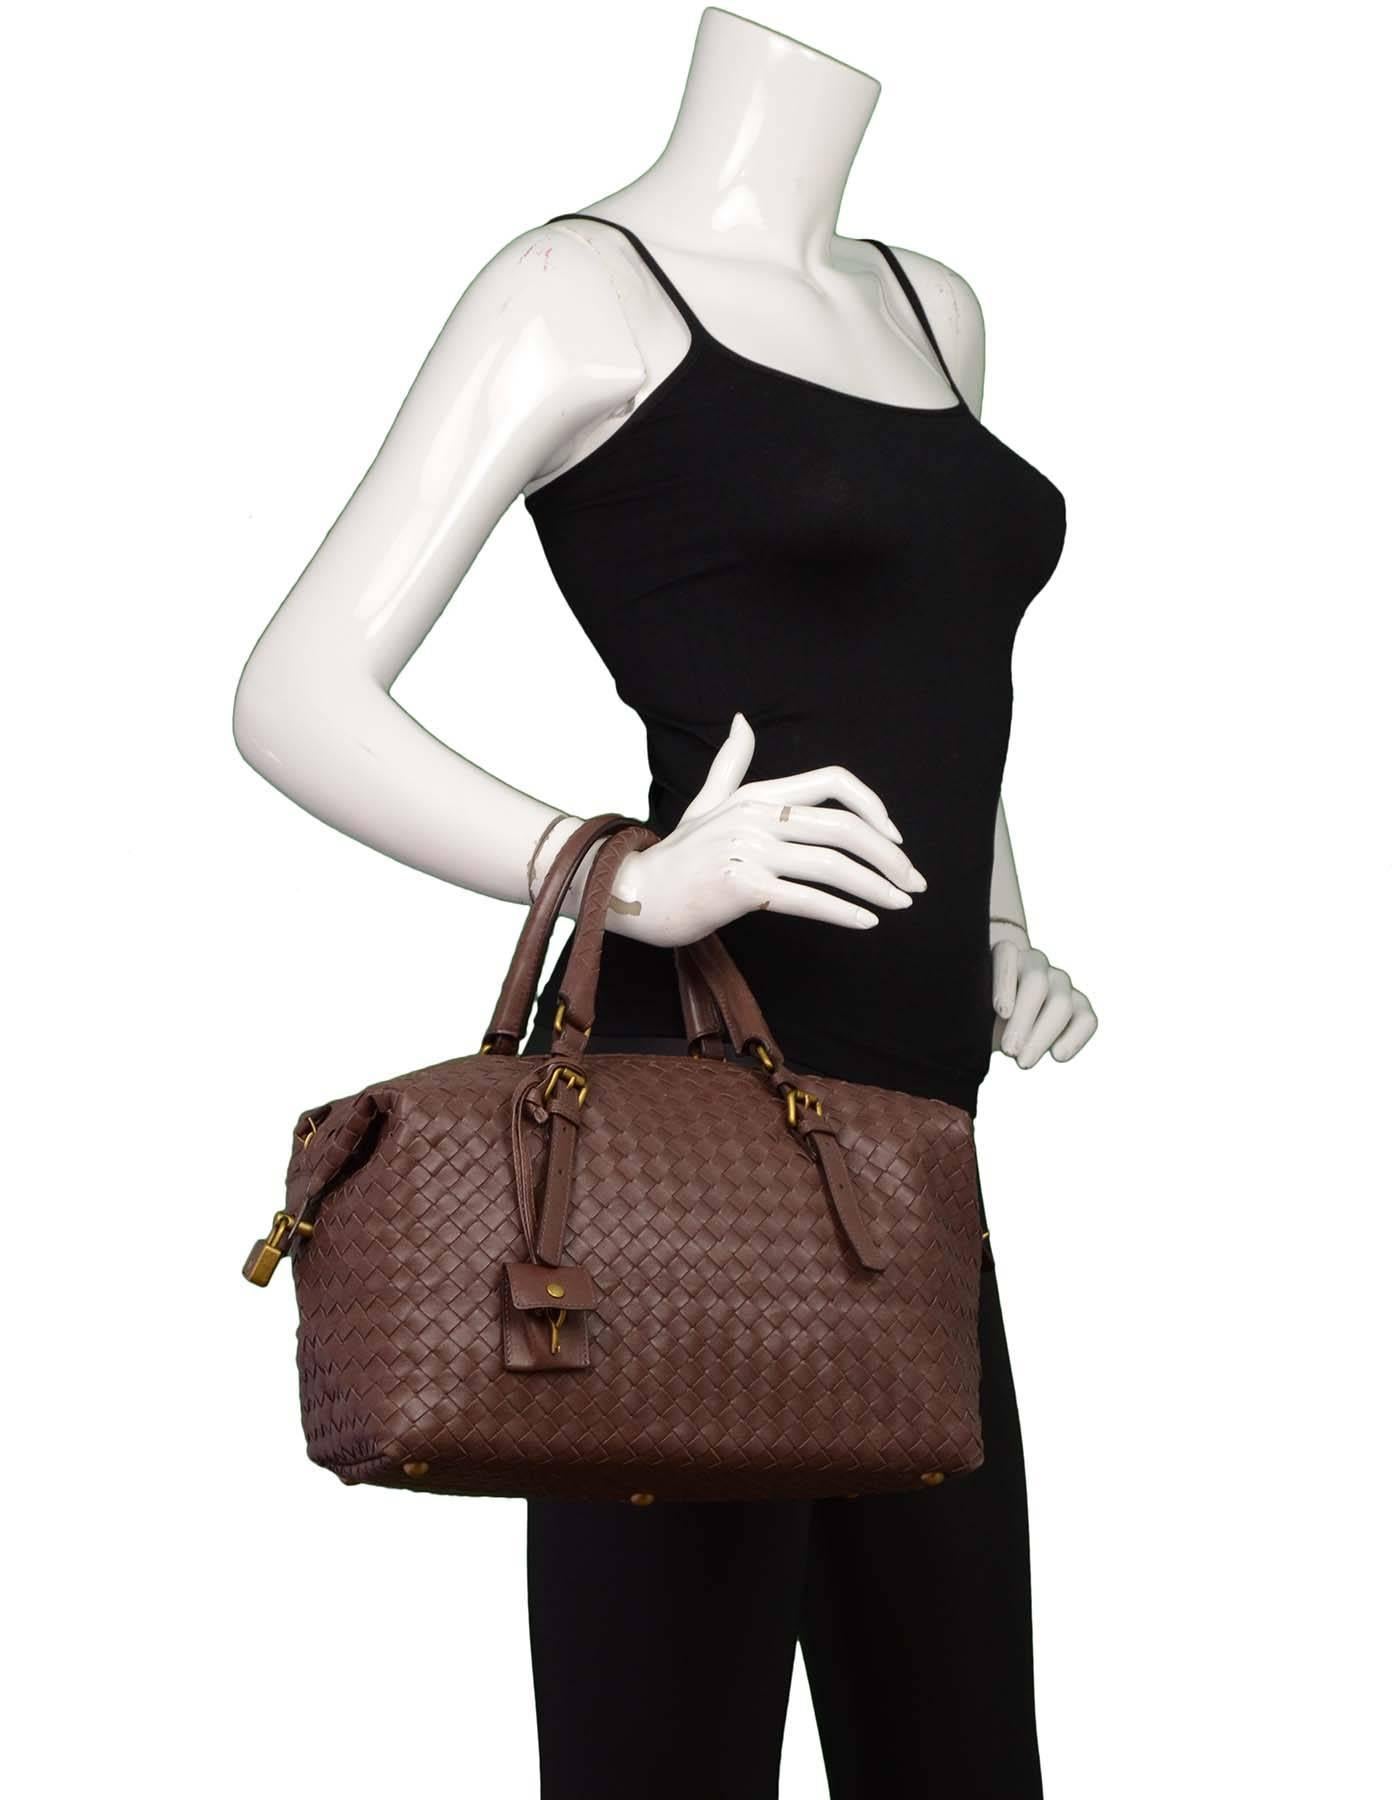 Bottega Veneta Brown Intrecciato Montaigne Bag

Made In: Italy
Color: Brown
Hardware: Antique goldtone
Materials: Leather
Lining: Grey suede
Closure/Opening: Zip top
Exterior Pockets: None
Interior Pockets: One zip pocket and one small wall